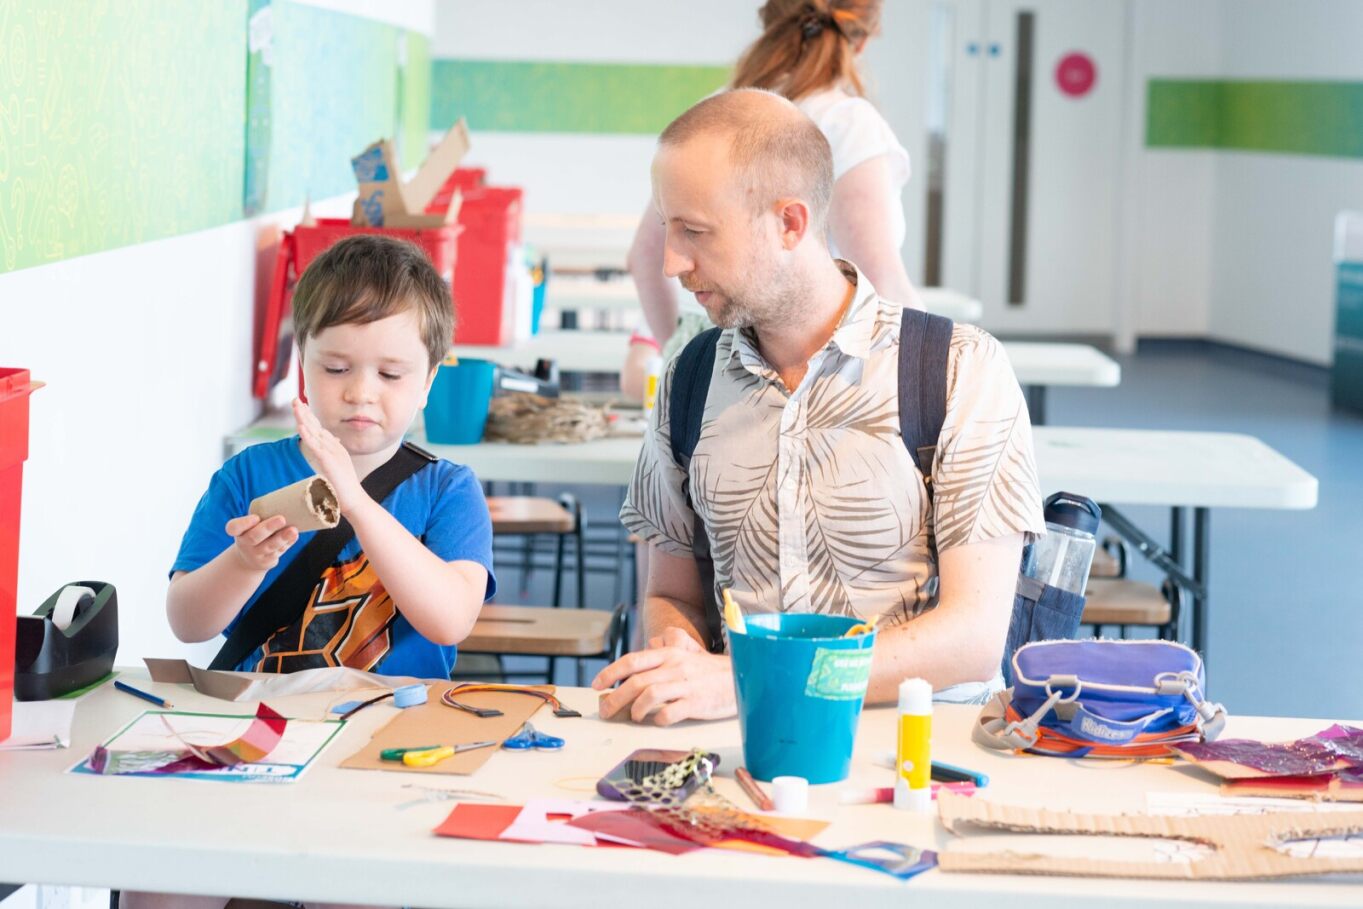 A man helps a young boy with a craft activity.